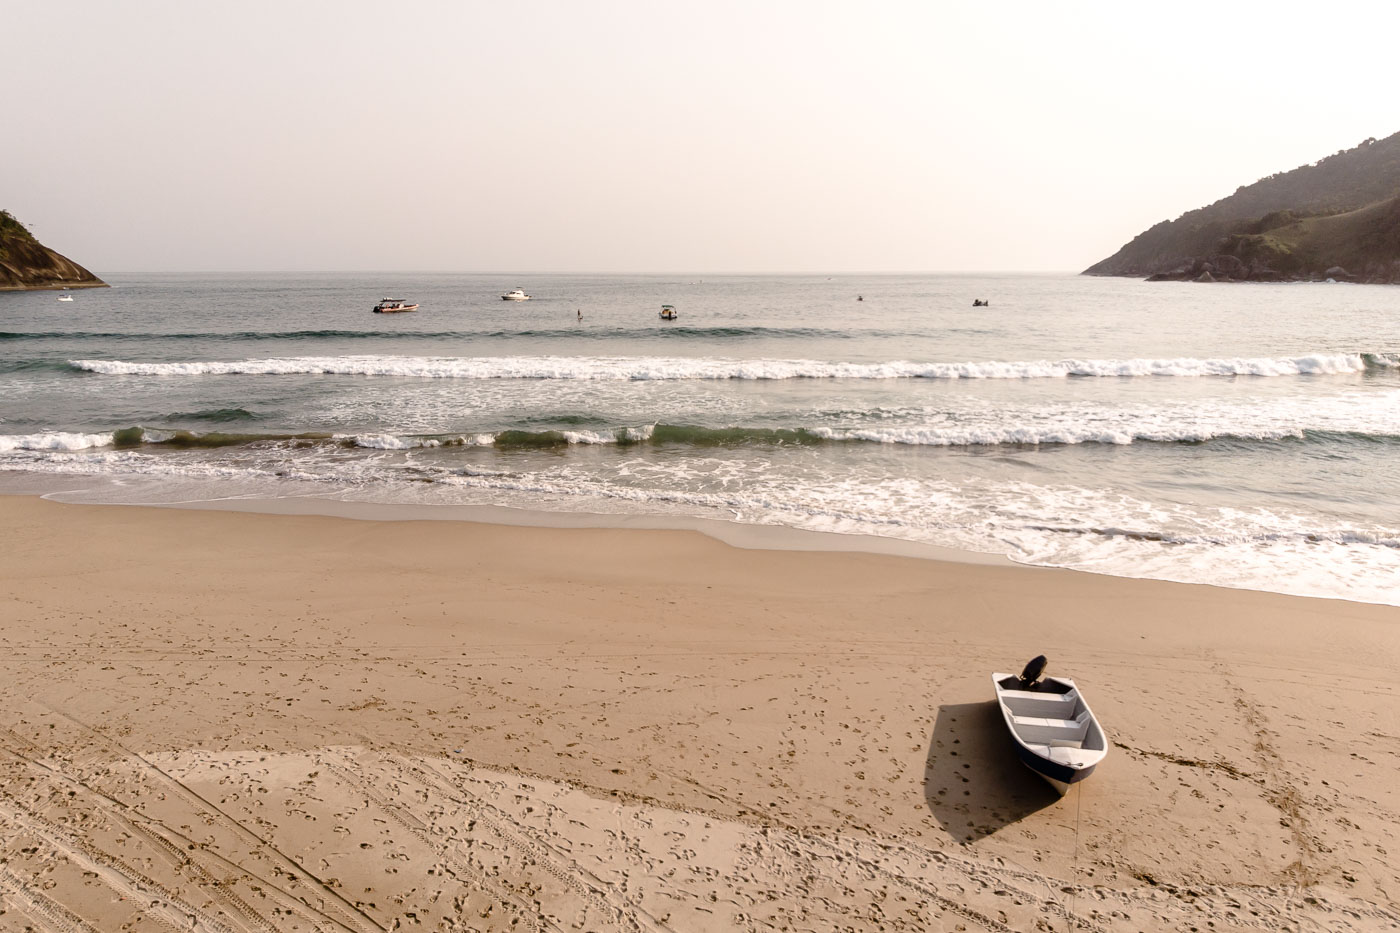 A single boat on the sand of the beach in Ilhabela Brazil